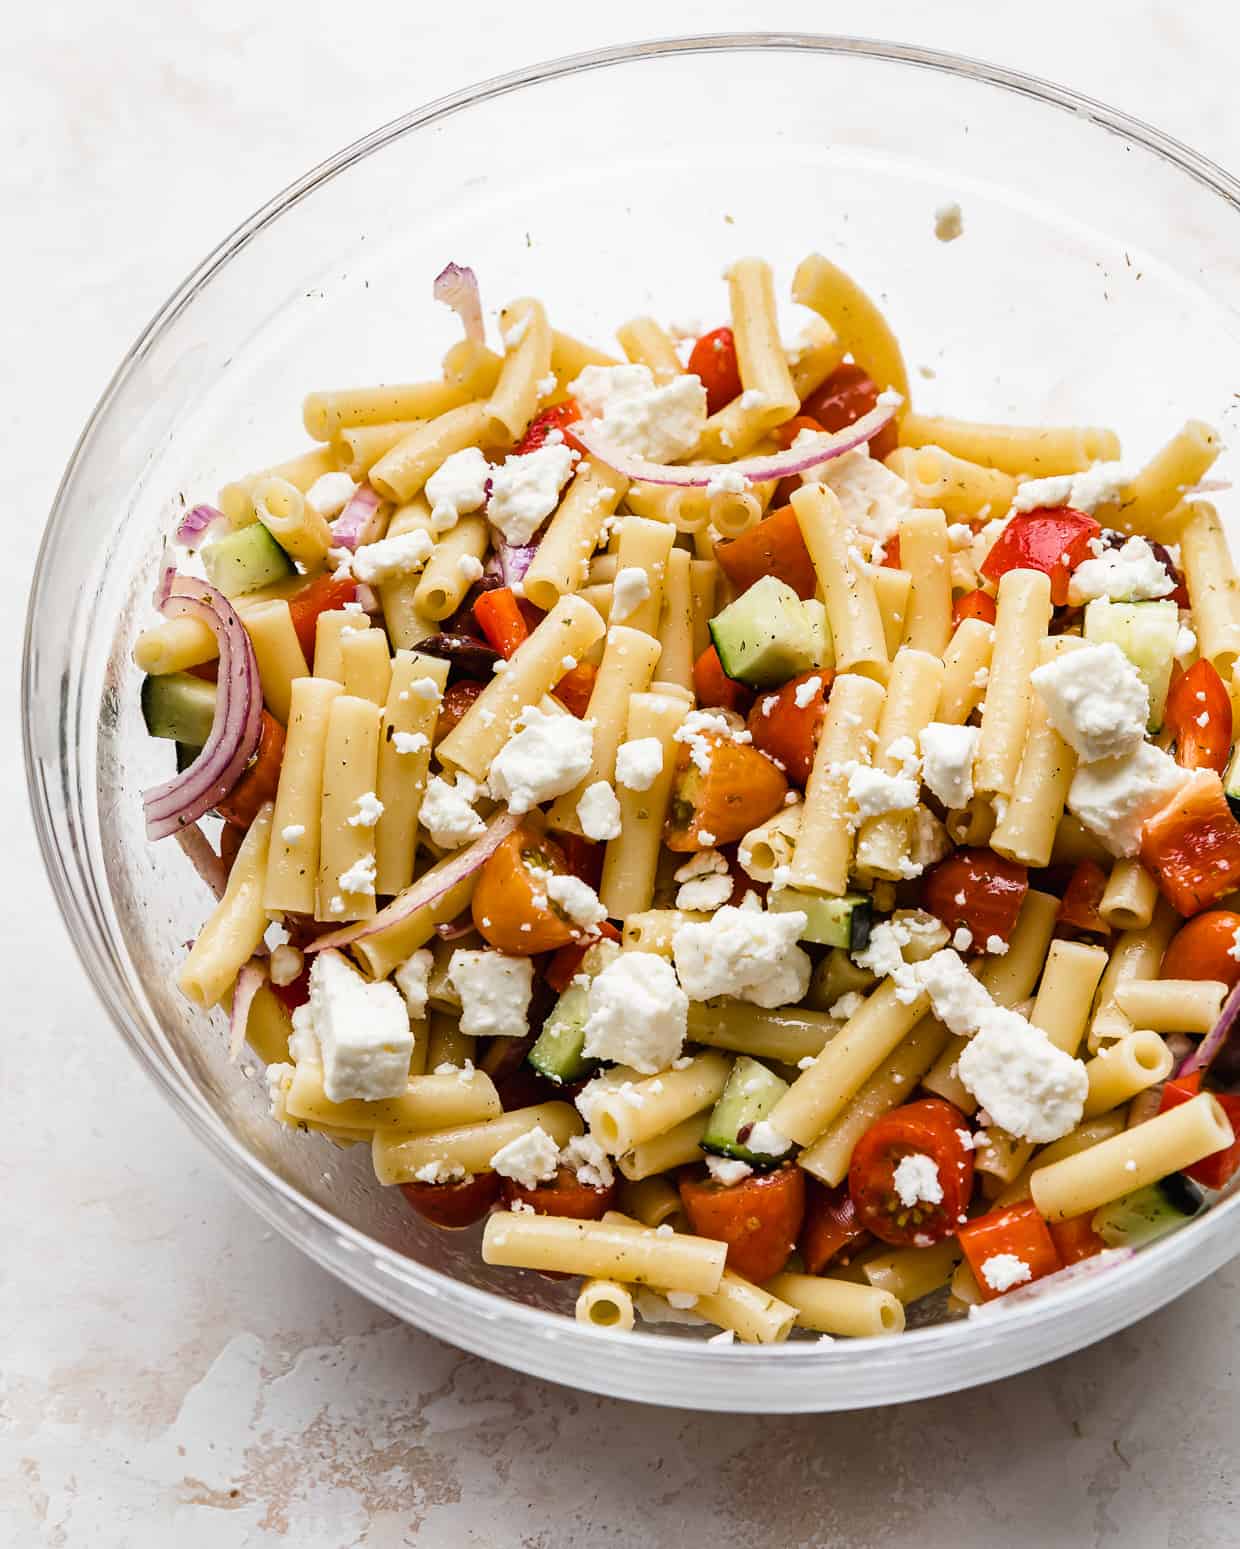 Greek pasta salad with ziti noodles in a glass bowl topped with feta cheese.